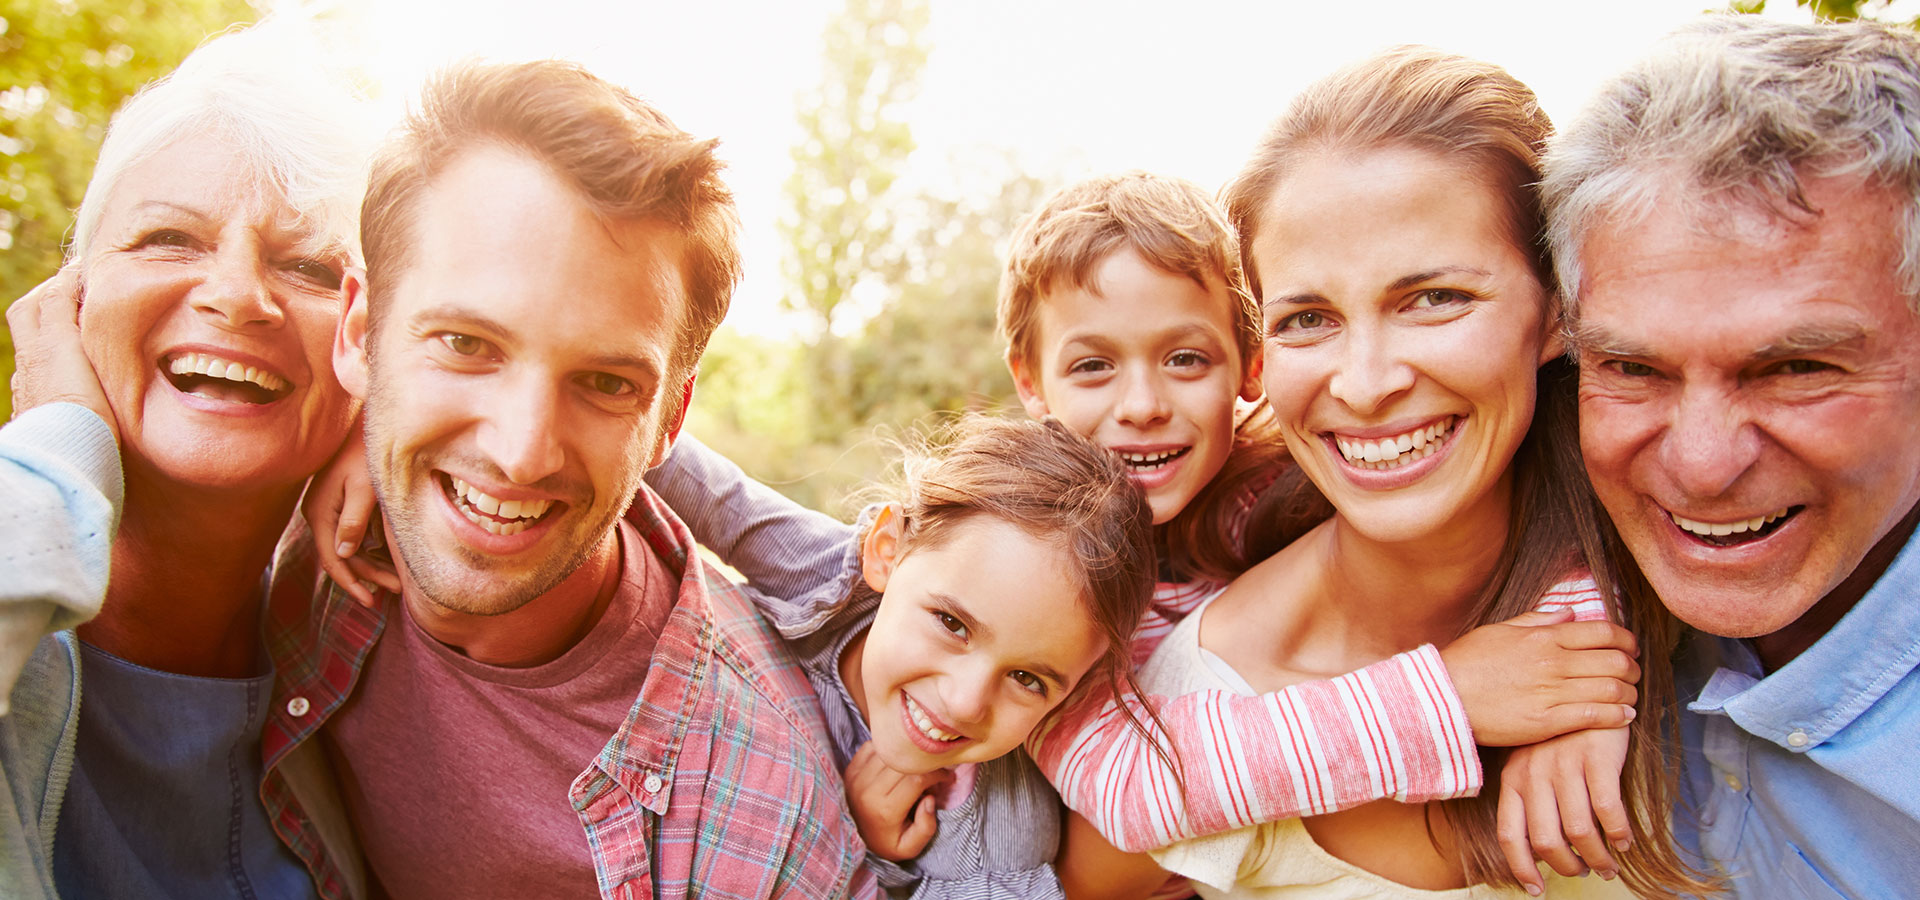 We Provide Chiropractic Care for the Family!